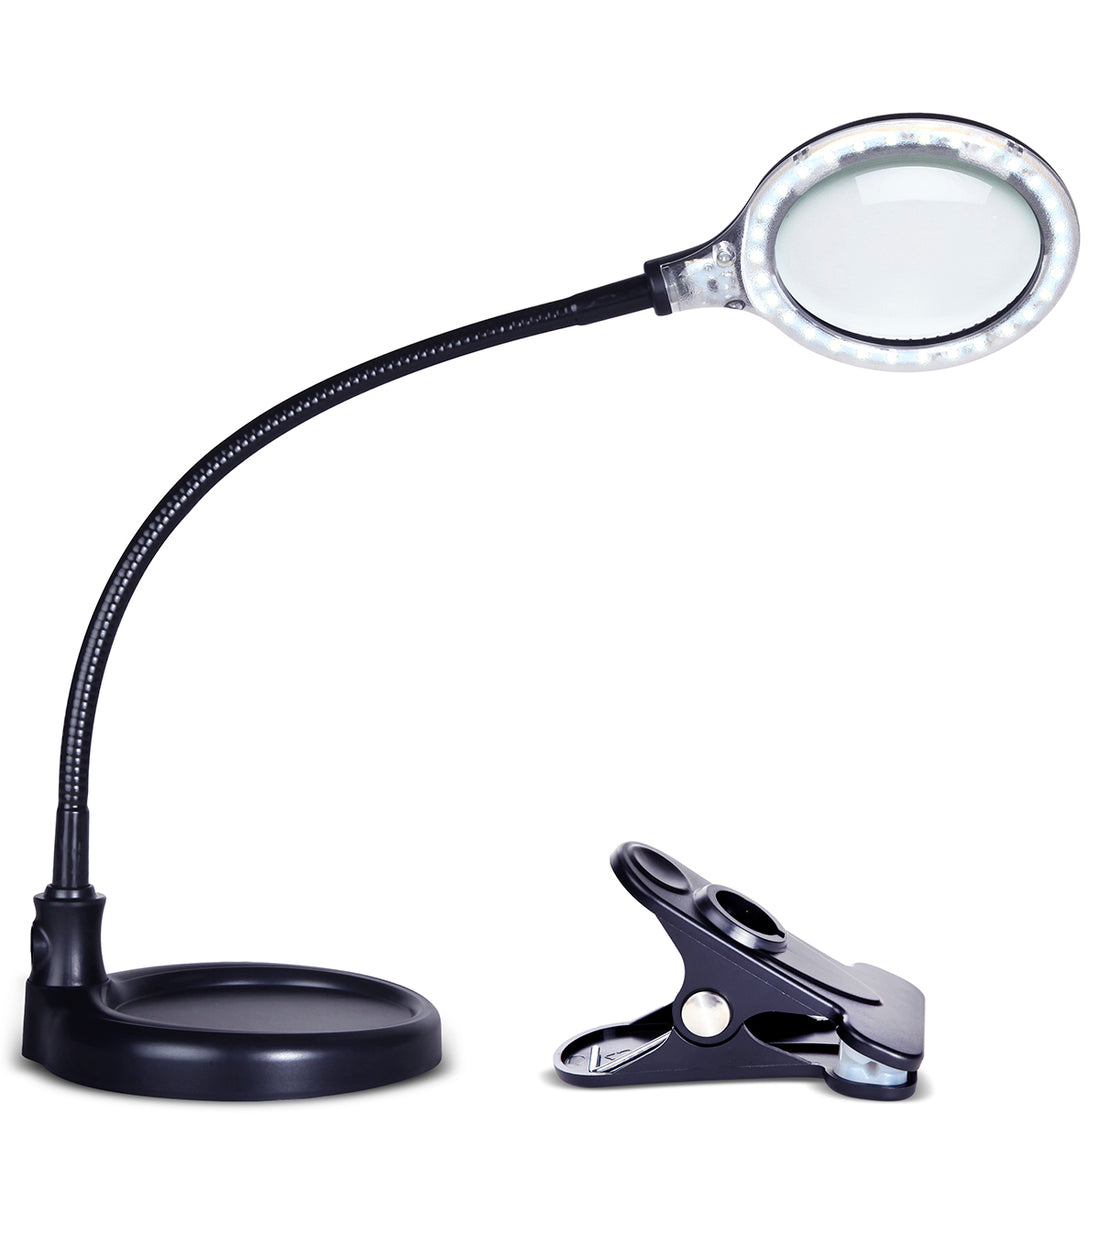 Brightech LightView Pro Flex 2 in 1: 2.25x Magnifier with Bright LED Light - Magnifying Glass Lamp with Base Stand & Clamp - for Reading, Painting, Sewing & Needle Crafts, Puzzle & Hobby Fans